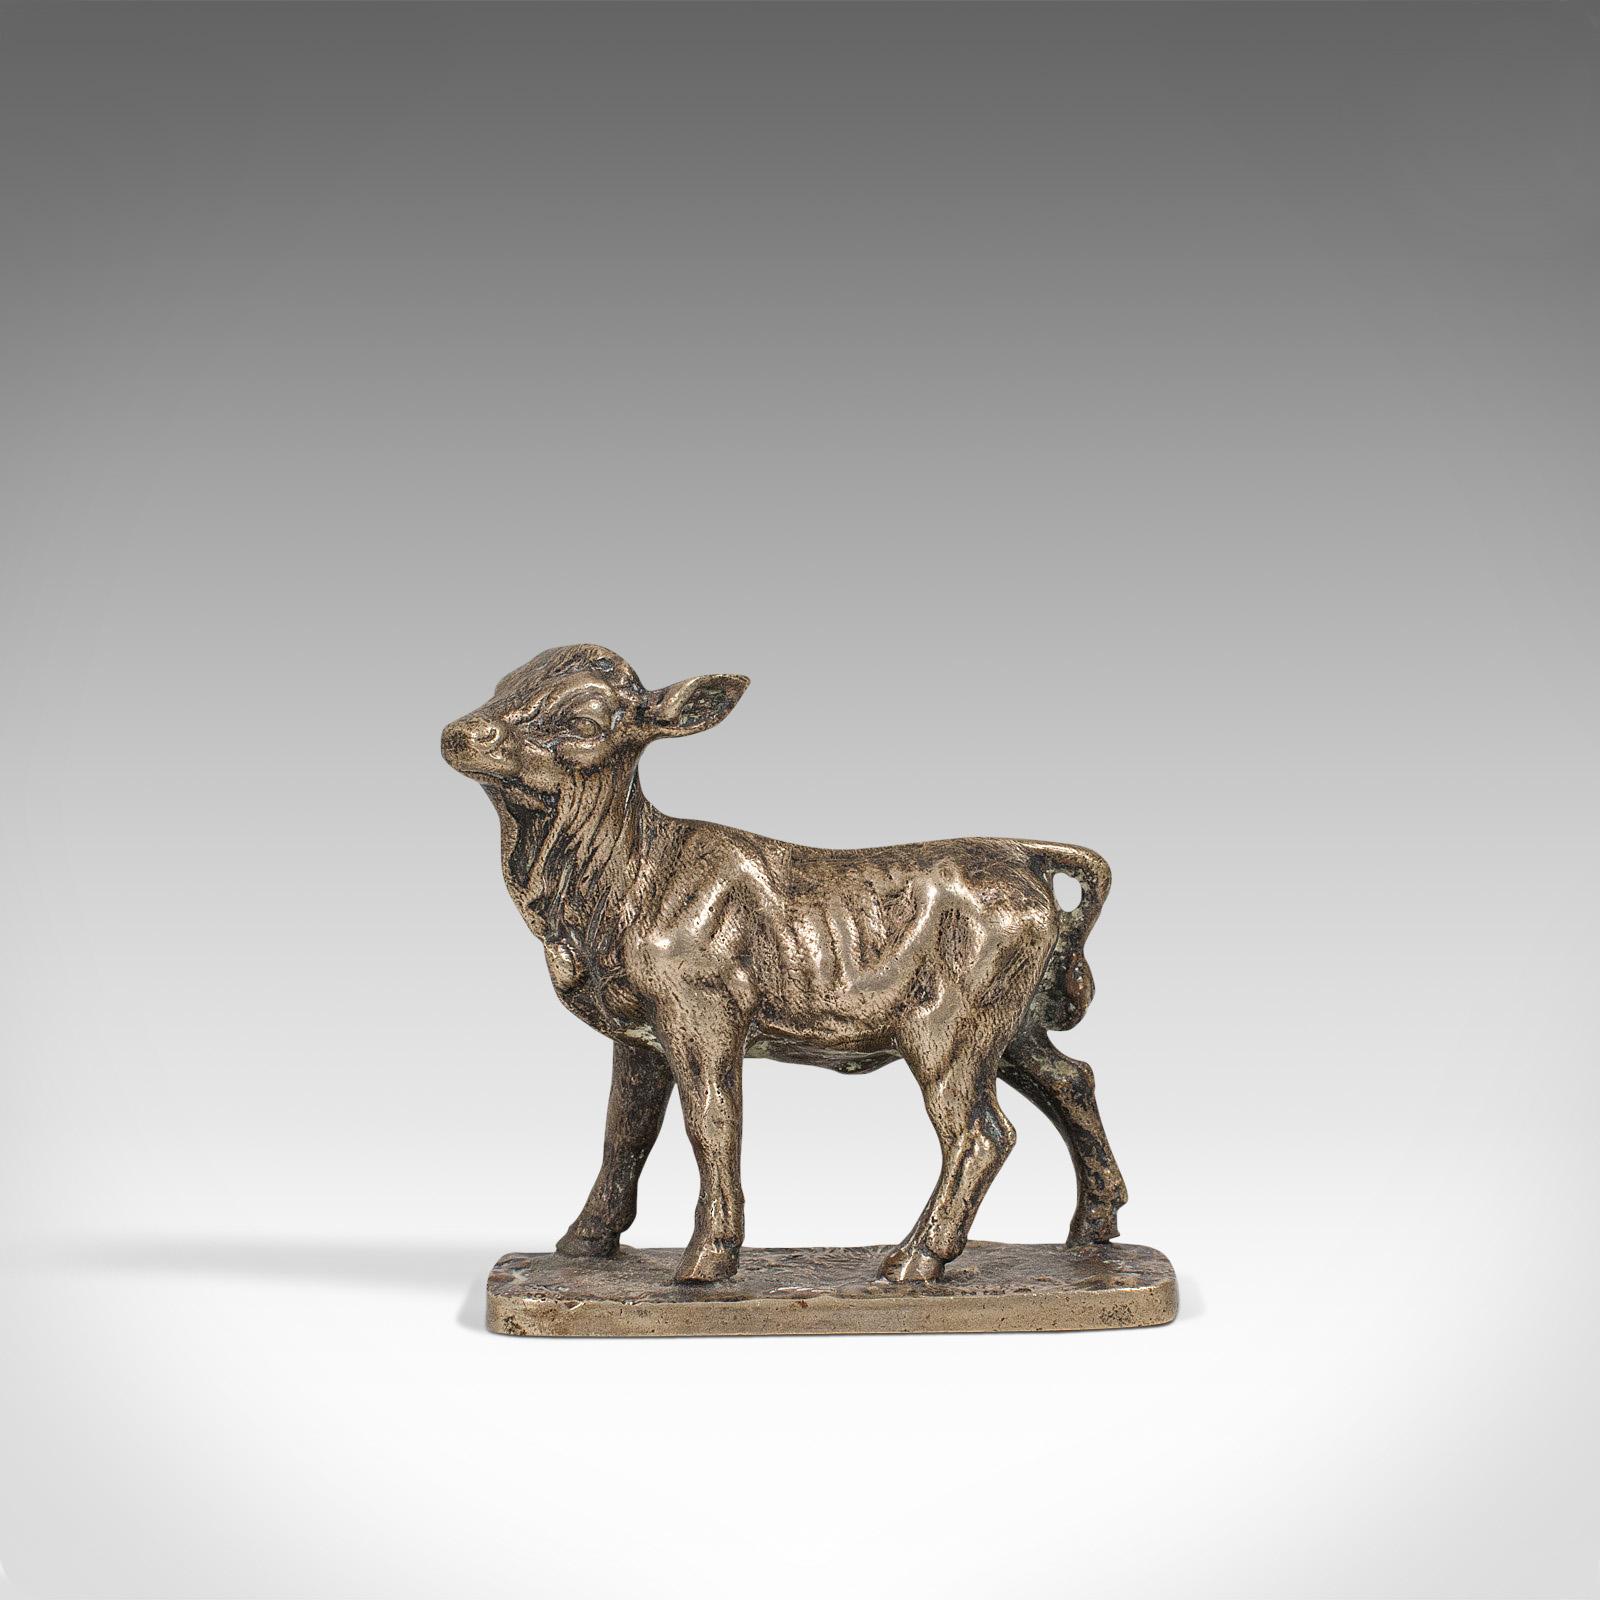 This is a small antique ornamental calf sculpture. An English, silver plated natural study by William Briggs and Co of Sheffield, dating to the late Victorian period, circa 1900.

Delightful small calf for the display shelf or desk
Displaying a